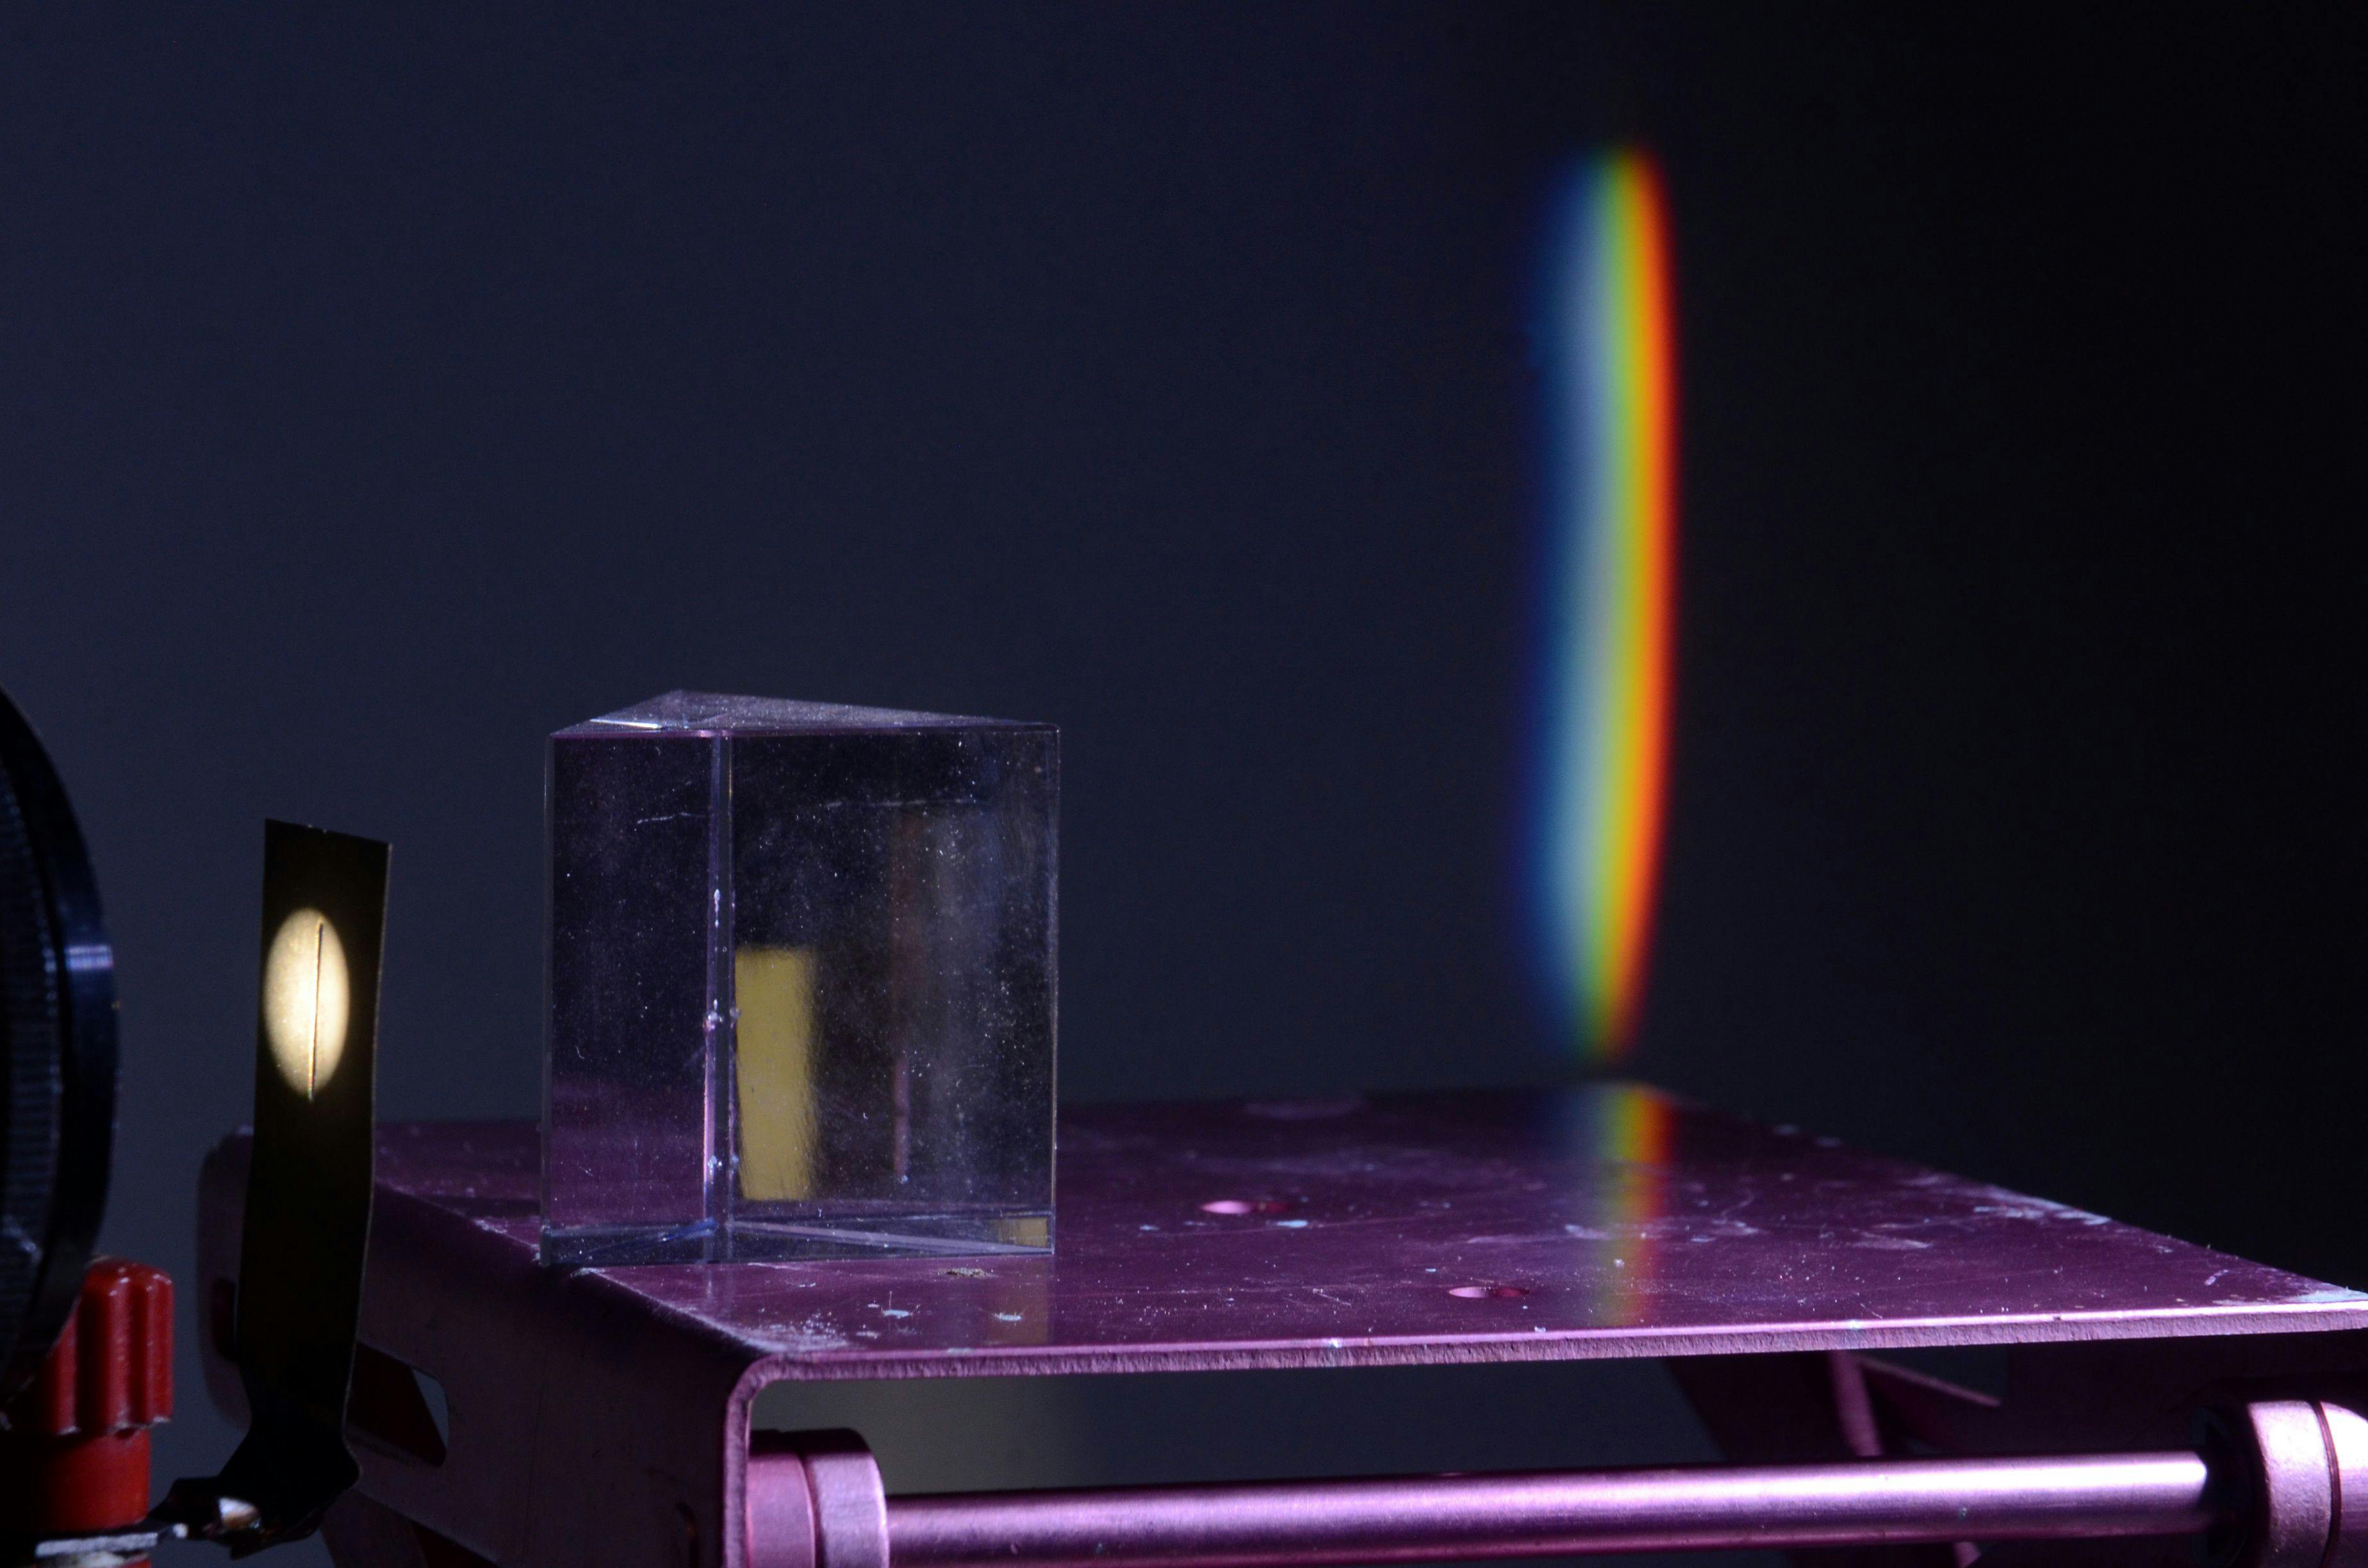 Refraction of white light in a prism, a spectre is projected on the wall in the background. | Image Credit: © Kim - stock.adobe.com